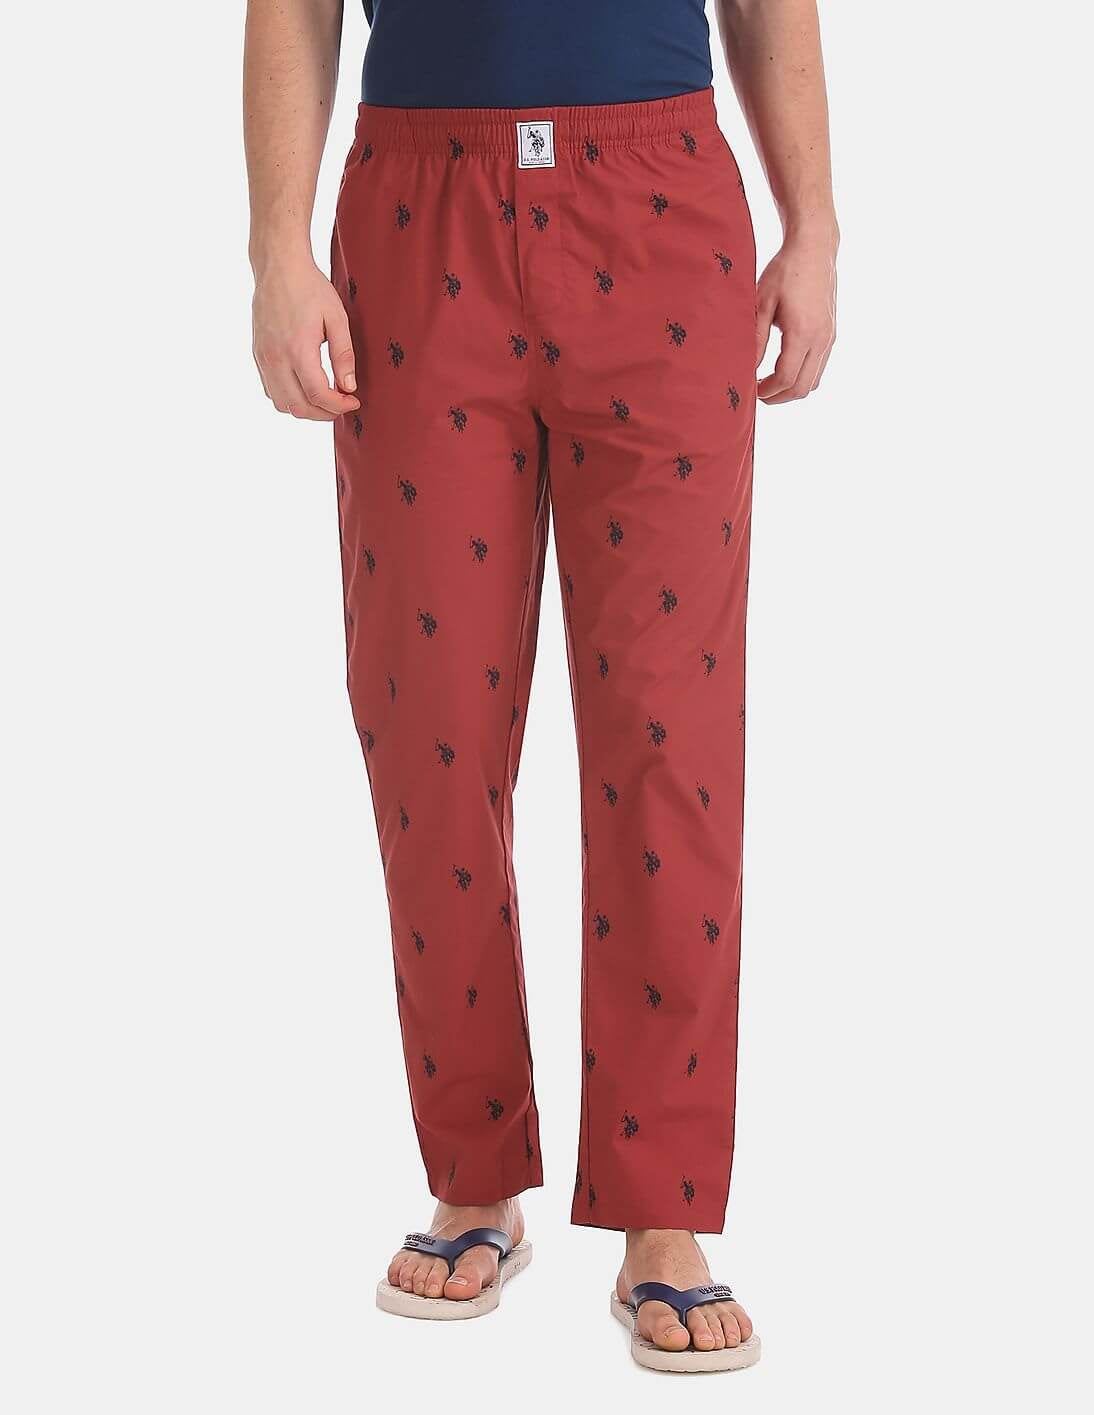 U S Polo Assn Maroon Printed Cotton Lounge Pants for Men #I506